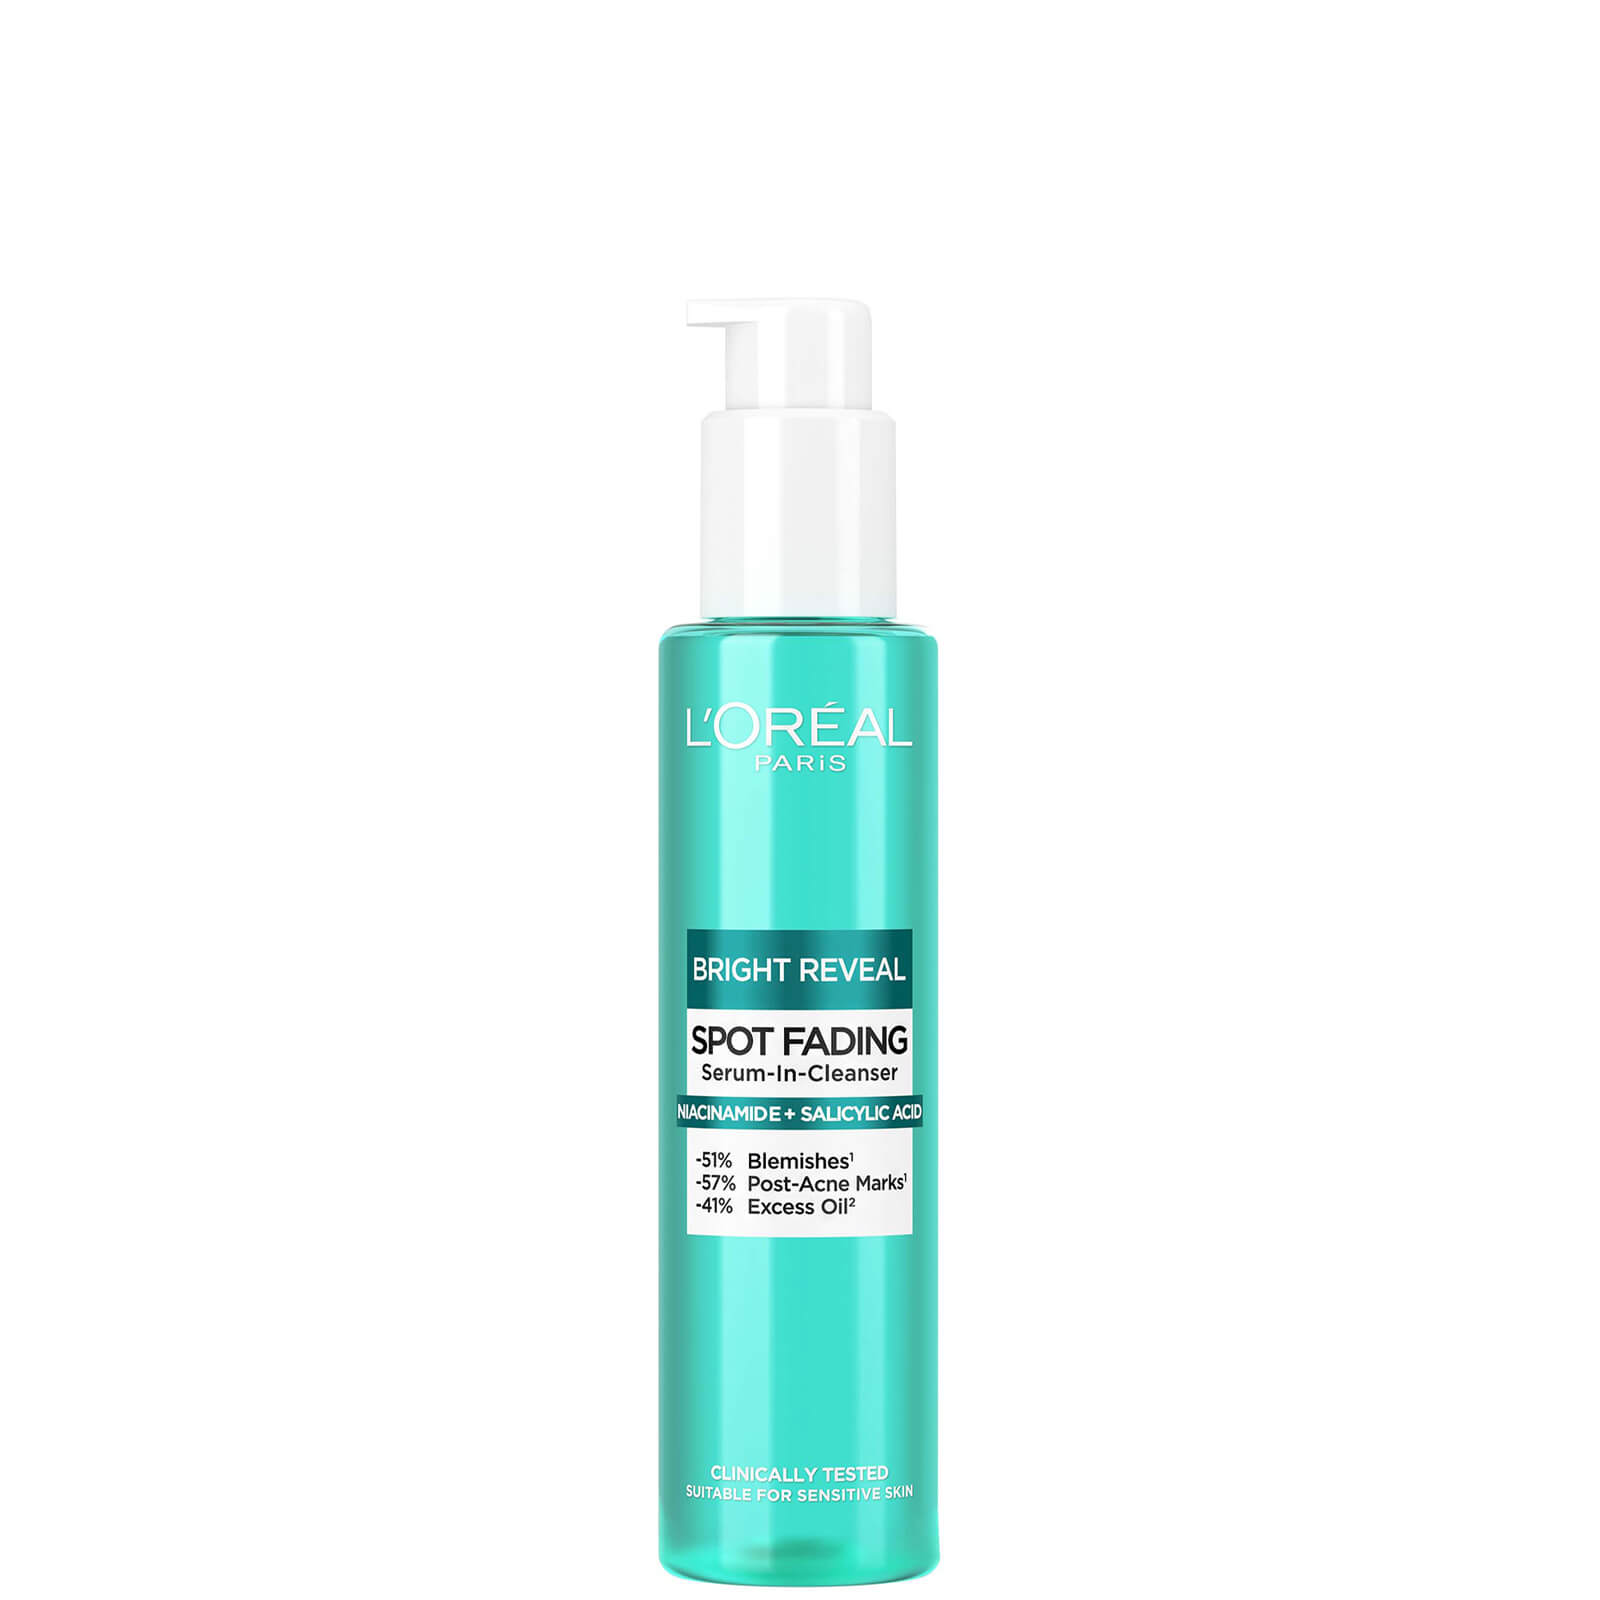 Image of L'Oréal Paris Bright Reveal Spot Fading Serum-in-Cleanser with Niacinamide and Salicylic Acid 150ml